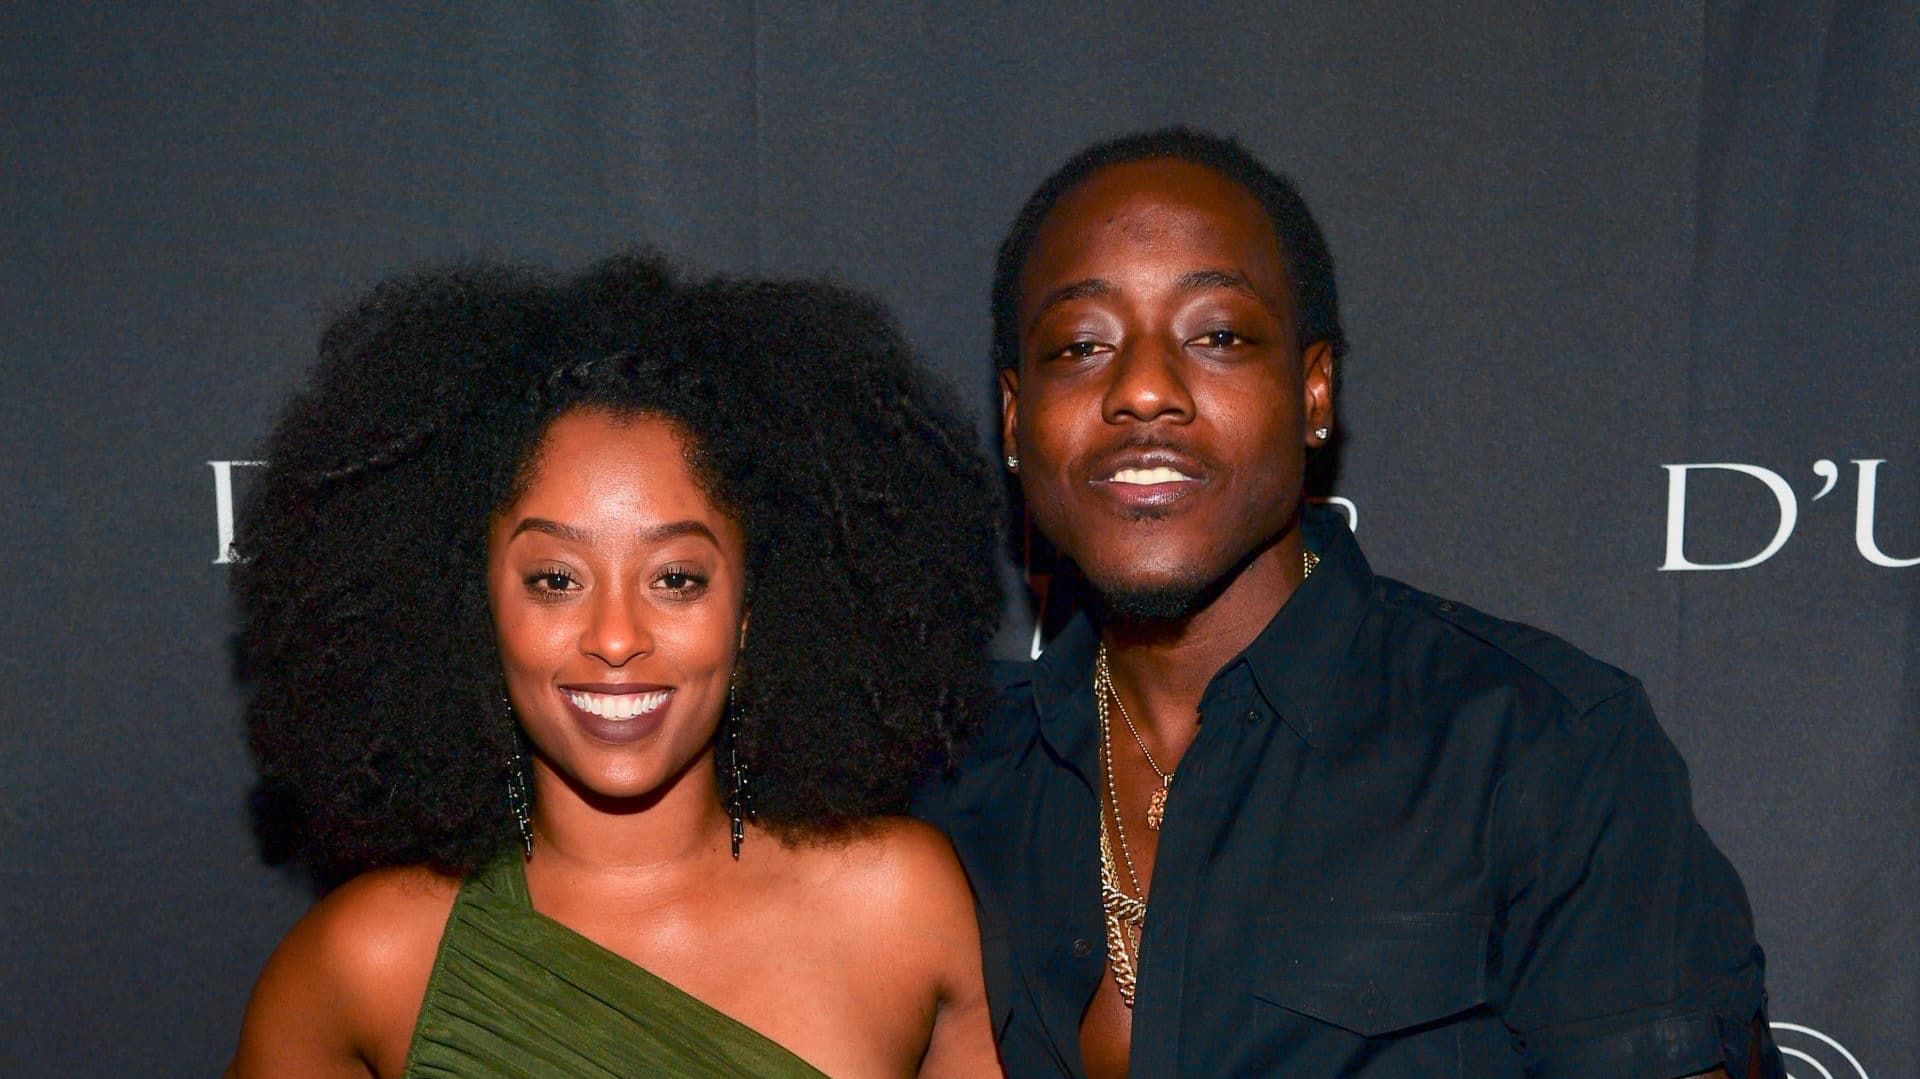 She Said Yes! Rapper Ace Hood Proposed To Shelah Marie